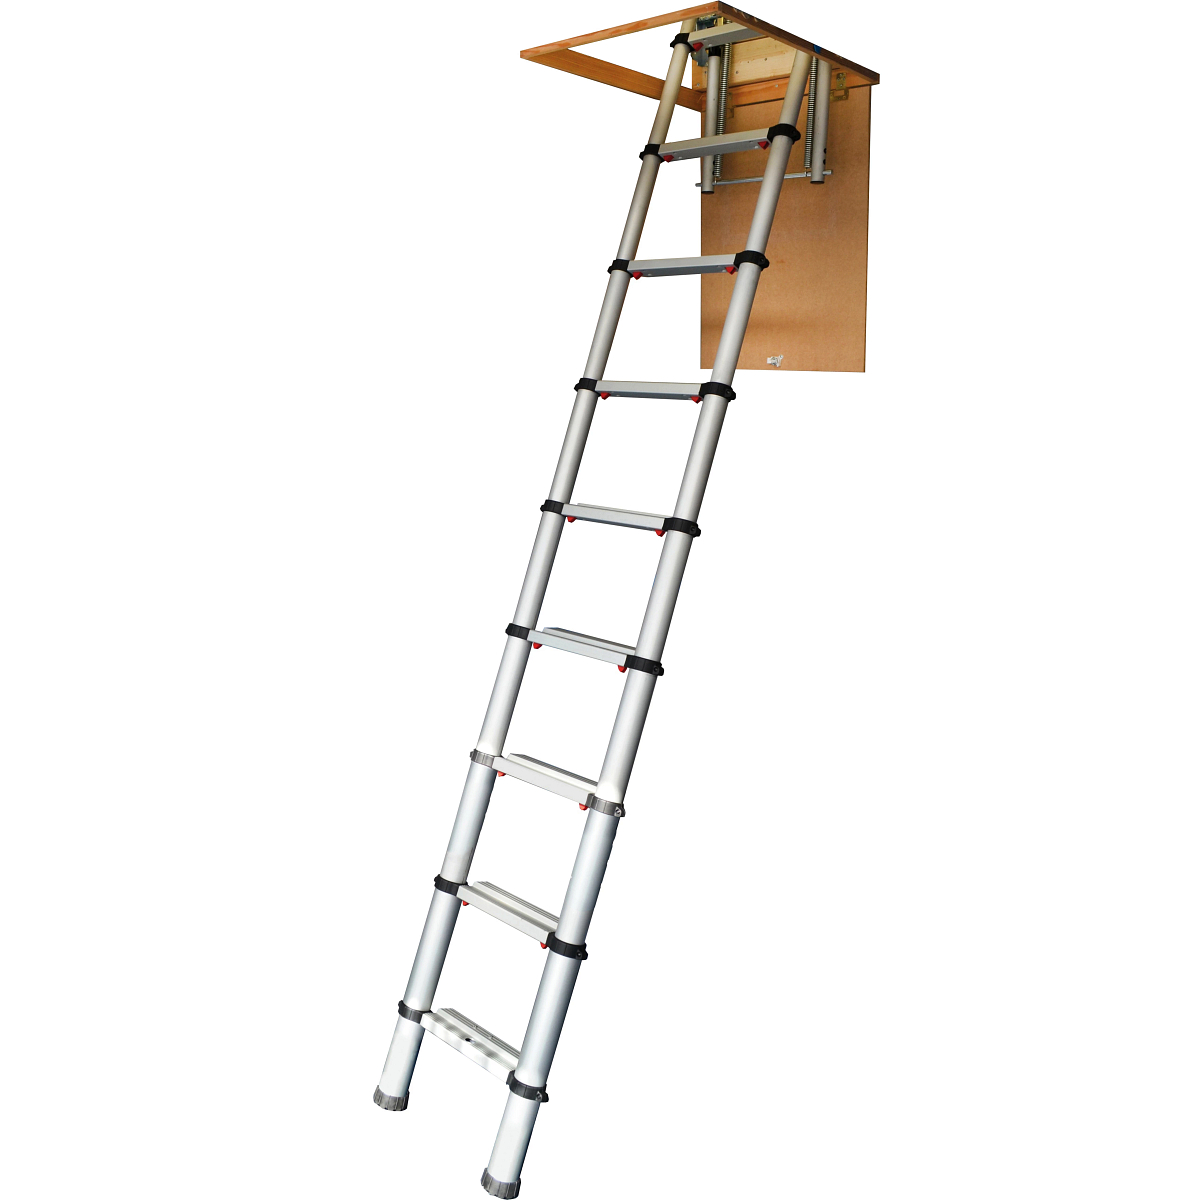 30100100 | Loft Ladders | Youngman Ladders and Access Equipment